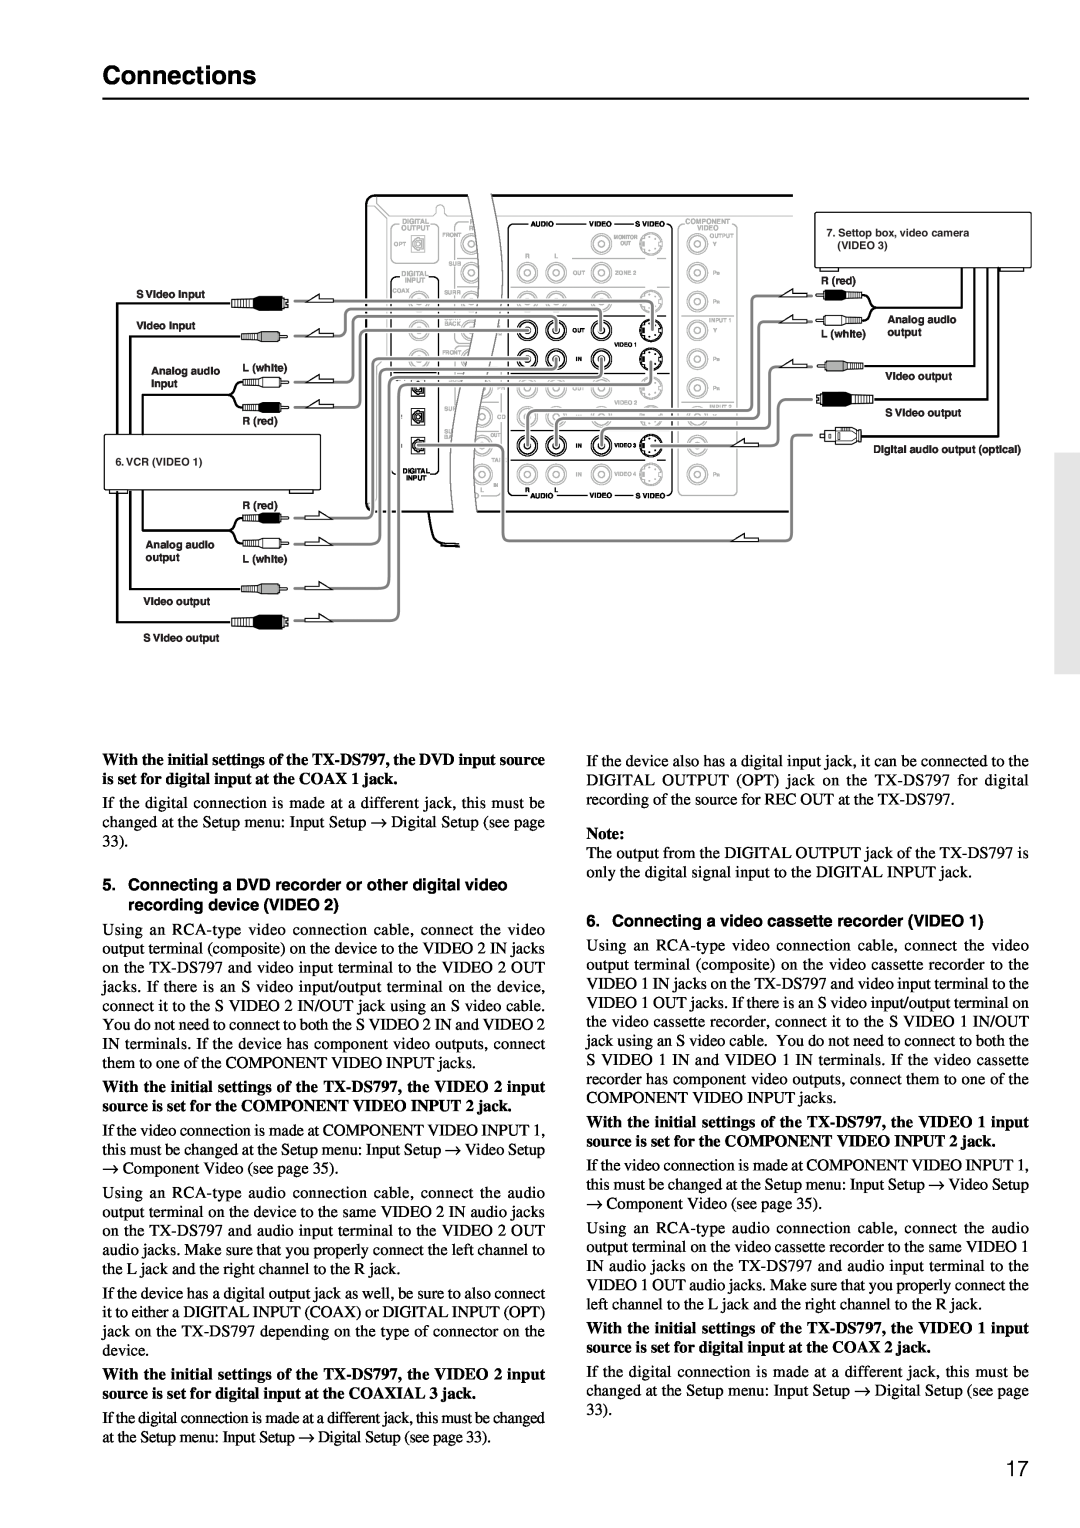 Onkyo TX-DS797 instruction manual Connections, Connecting a video cassette recorder VIDEO 